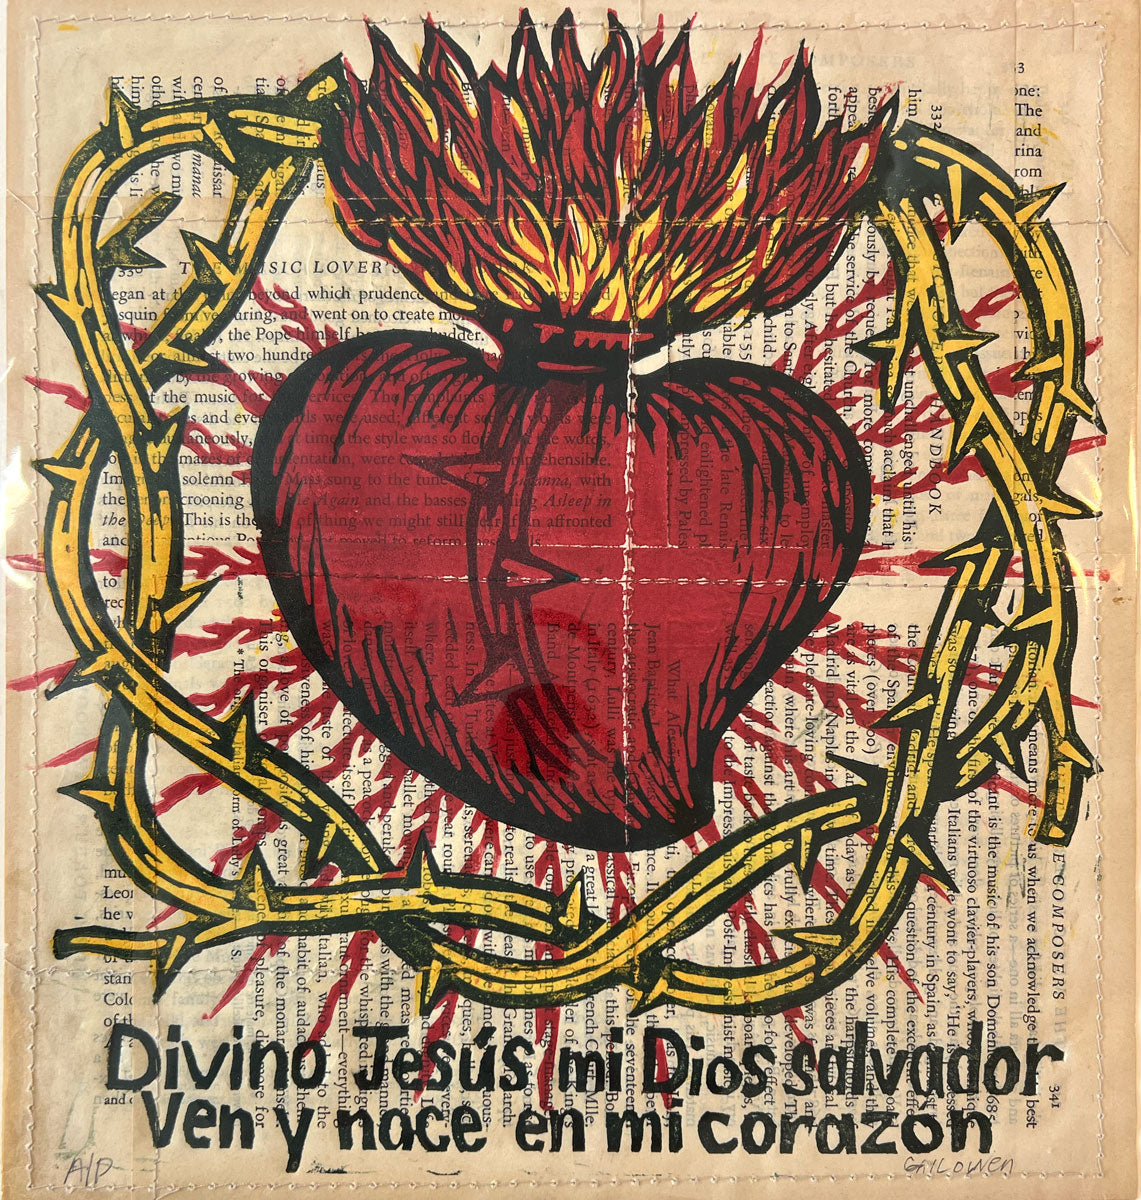 215. Divine Jesus my Savior God Come and be Born in my Heart (Sewn)